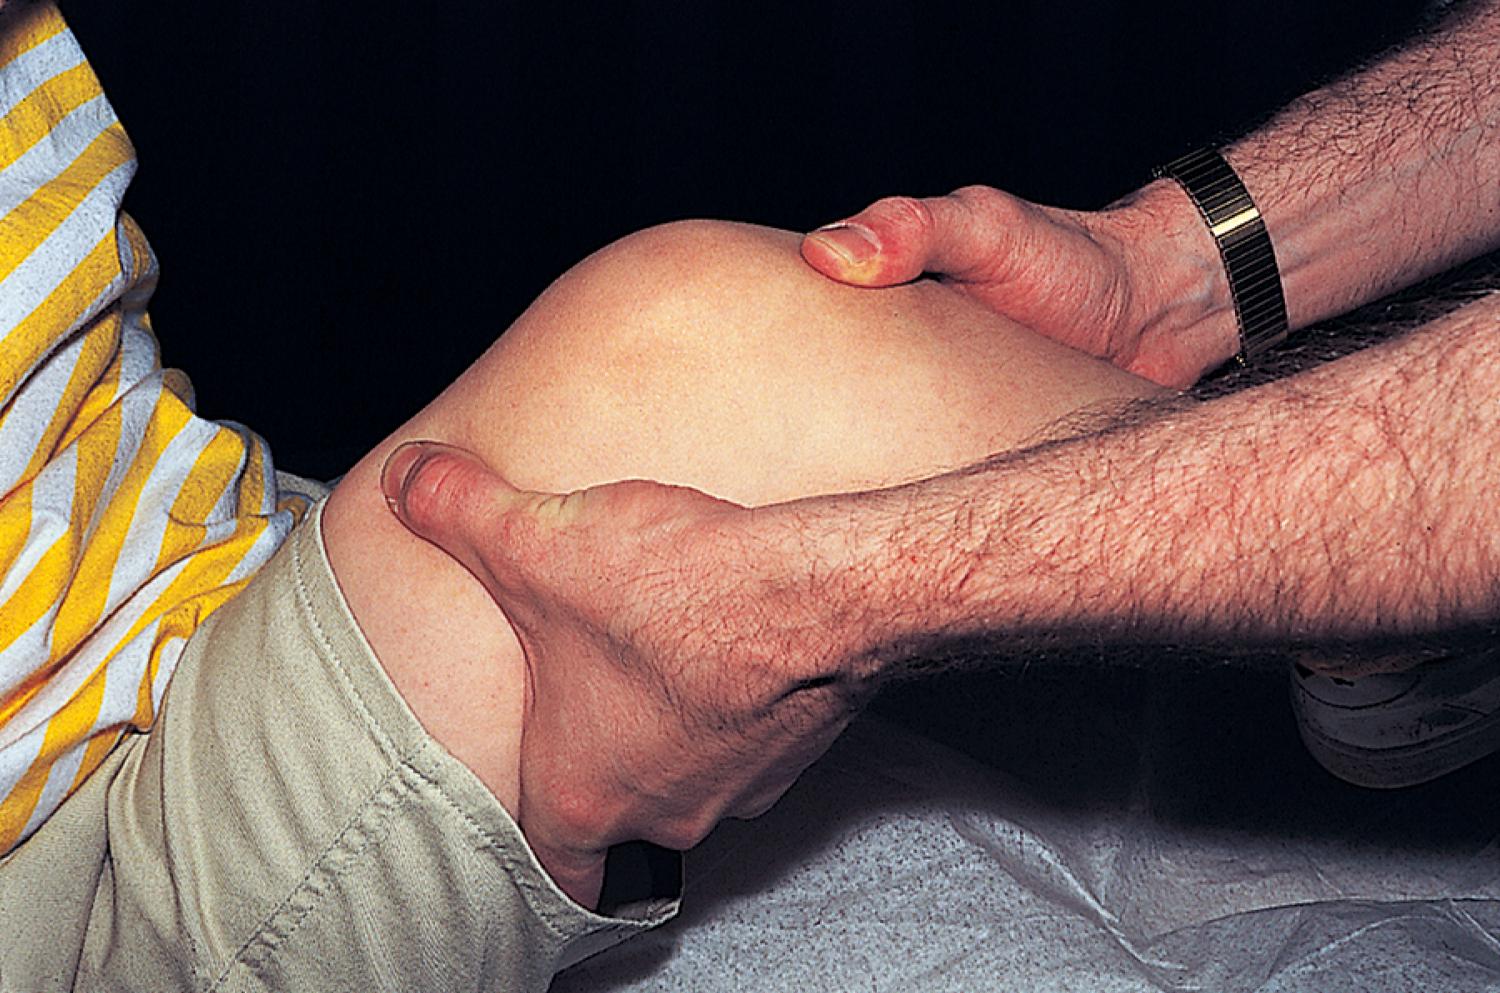 Fig. 22.13, Lachman test for anterior cruciate ligament tear. With the knee flexed to 15 degrees, the distal femur is grasped with one hand and the proximal tibia with the other, with the thumb on the joint line. The tibia is moved forward while the femur is pushed backward. Any abnormal displacement of the tibia on the femur indicates anterior cruciate instability and represents a positive test.